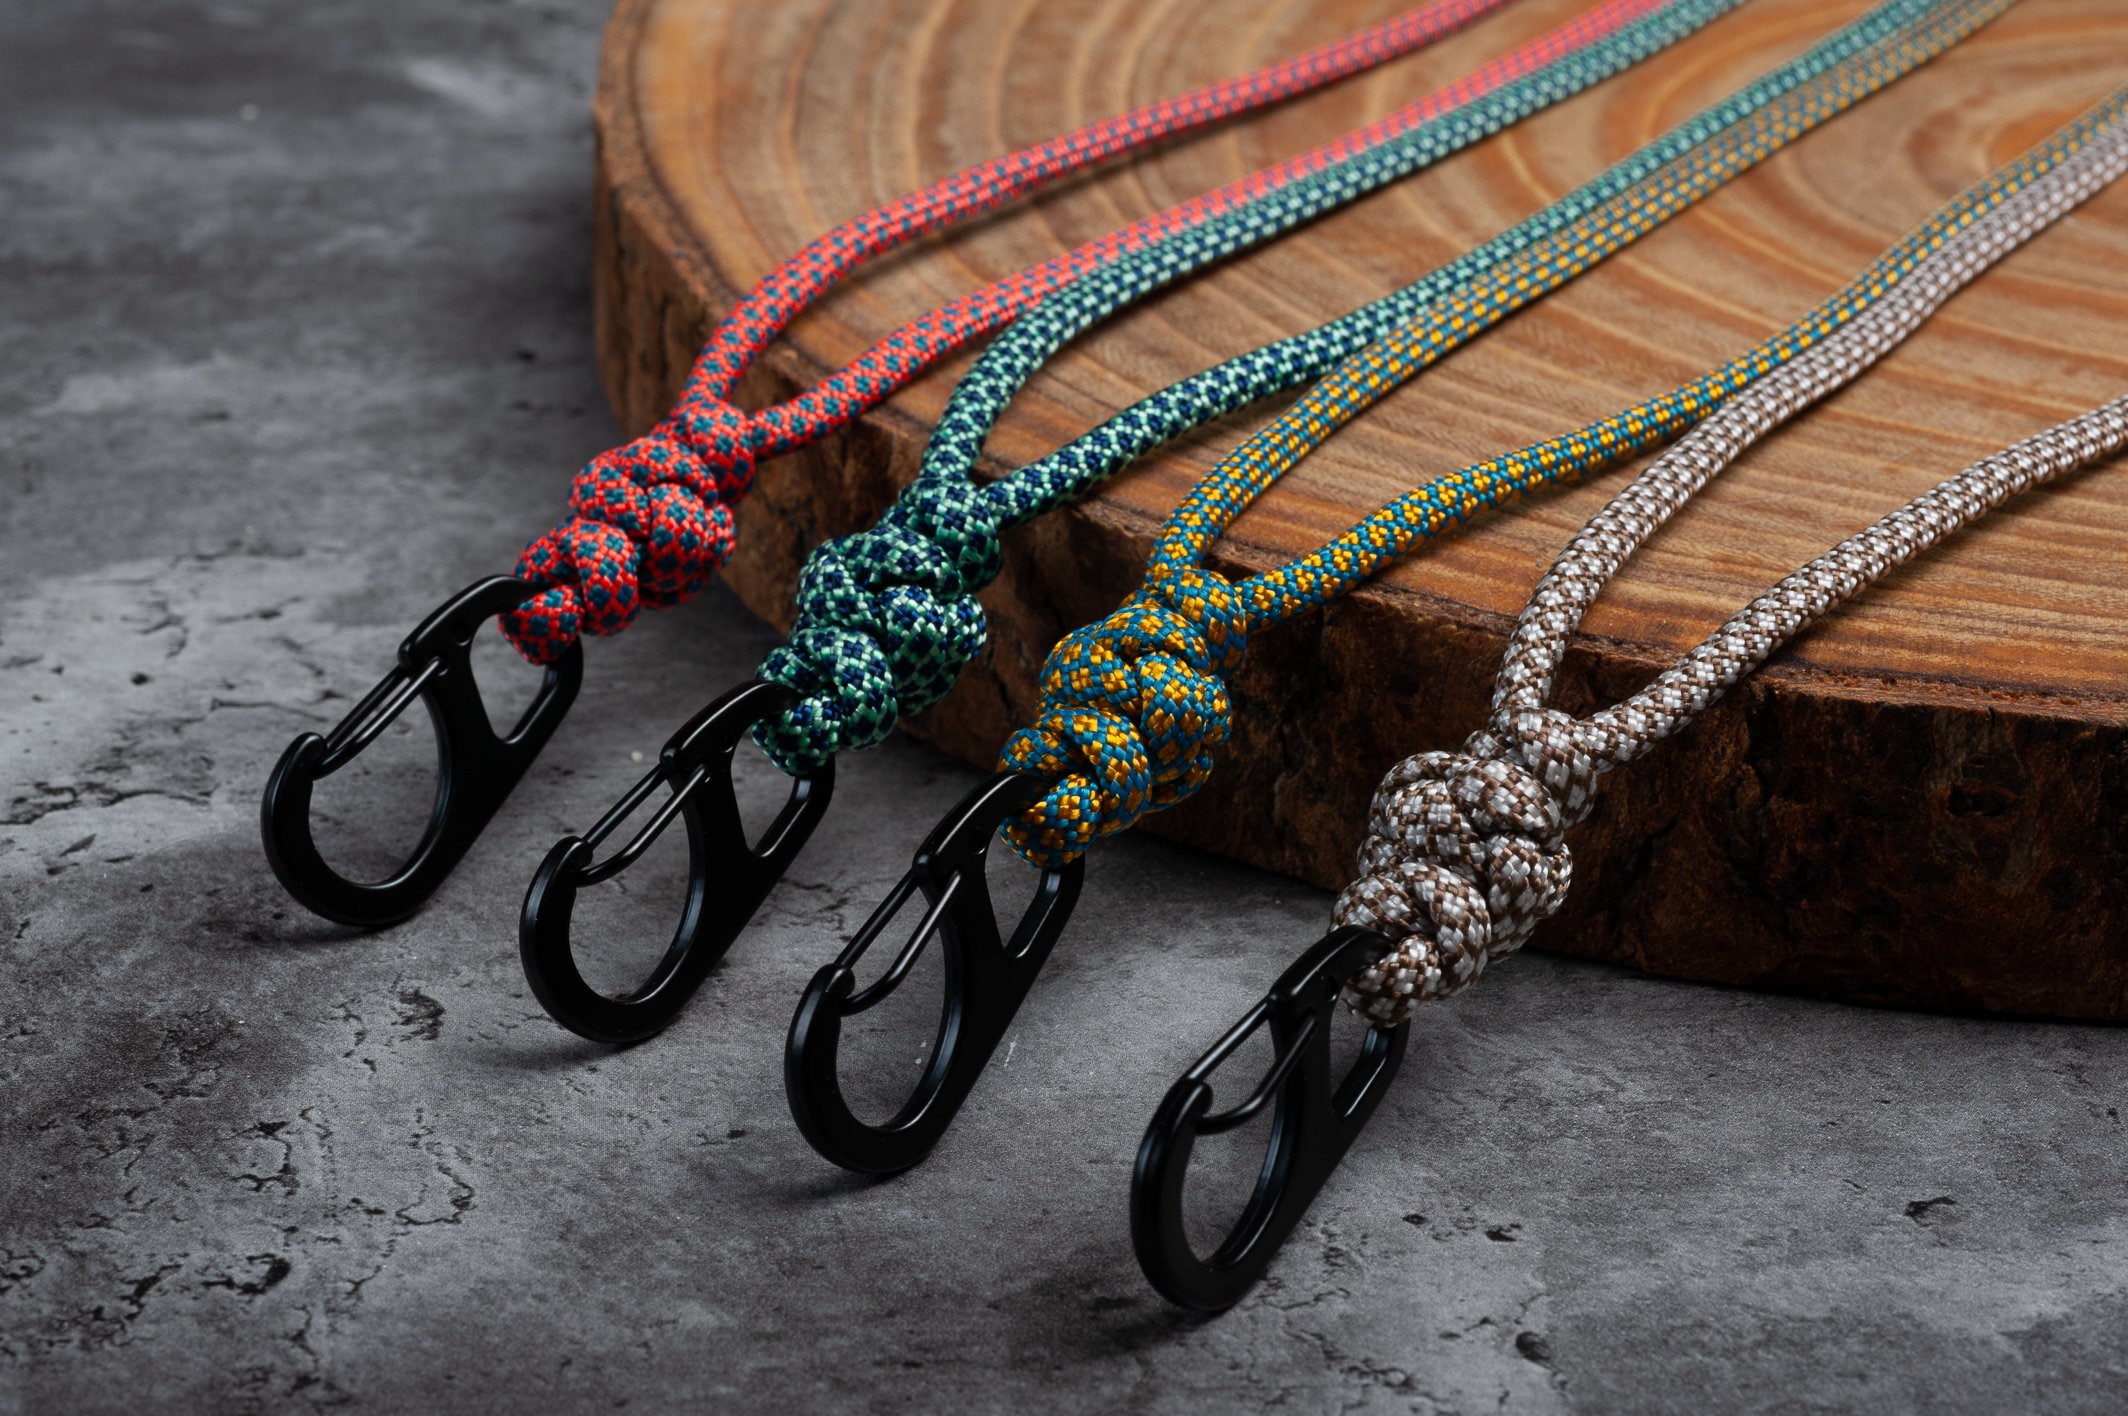 Two Color Minimal Paracord ID Lanyard with Breakaway Clasp and Metal Carabiner (Free Badge Holder Included) | Choose from 105 Colors Black